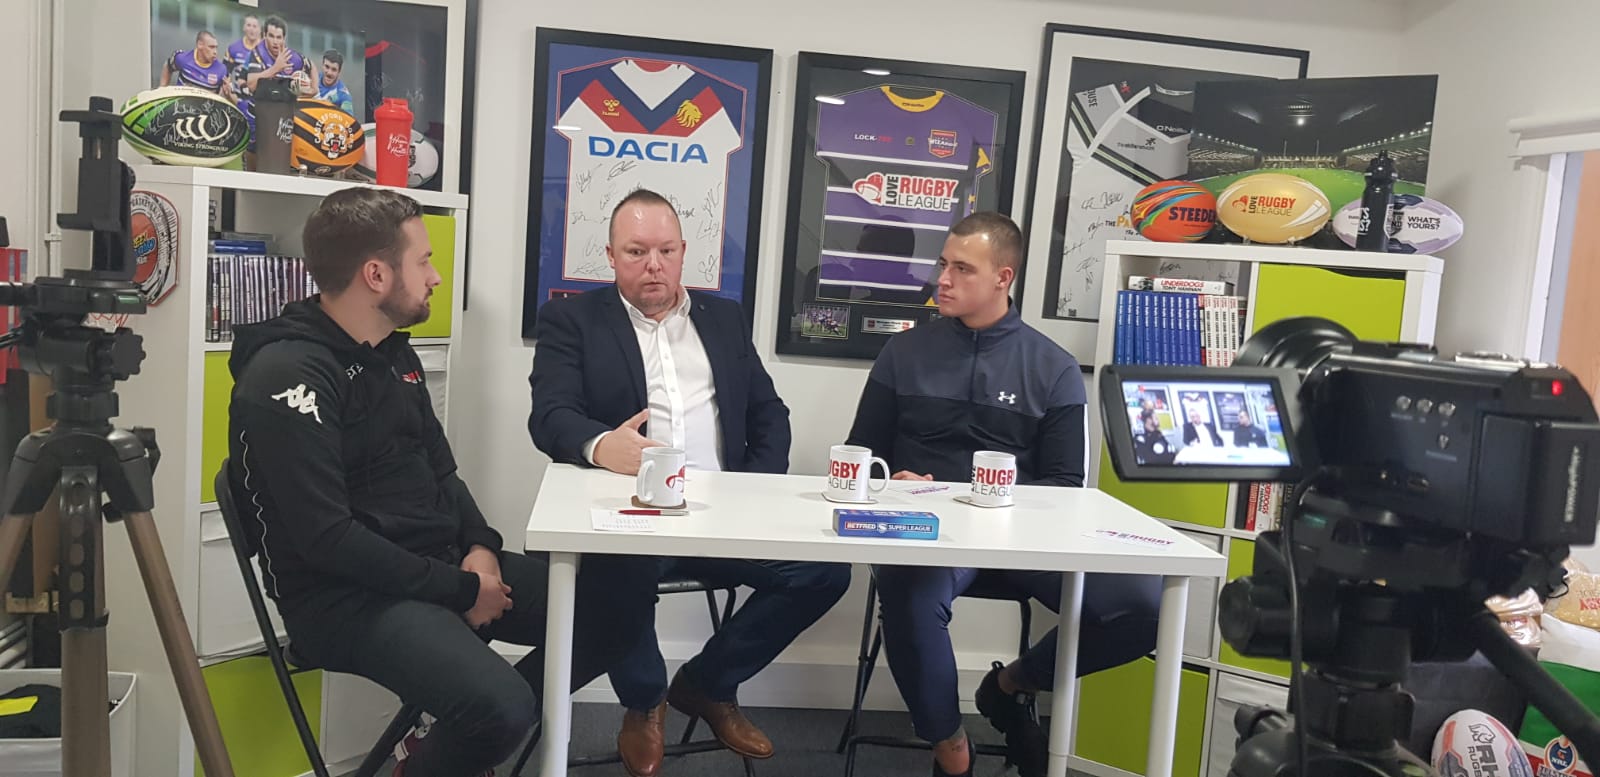 League 1 club chairman Andy Mazey on funding, player pool & community links | The Last Tackle #3